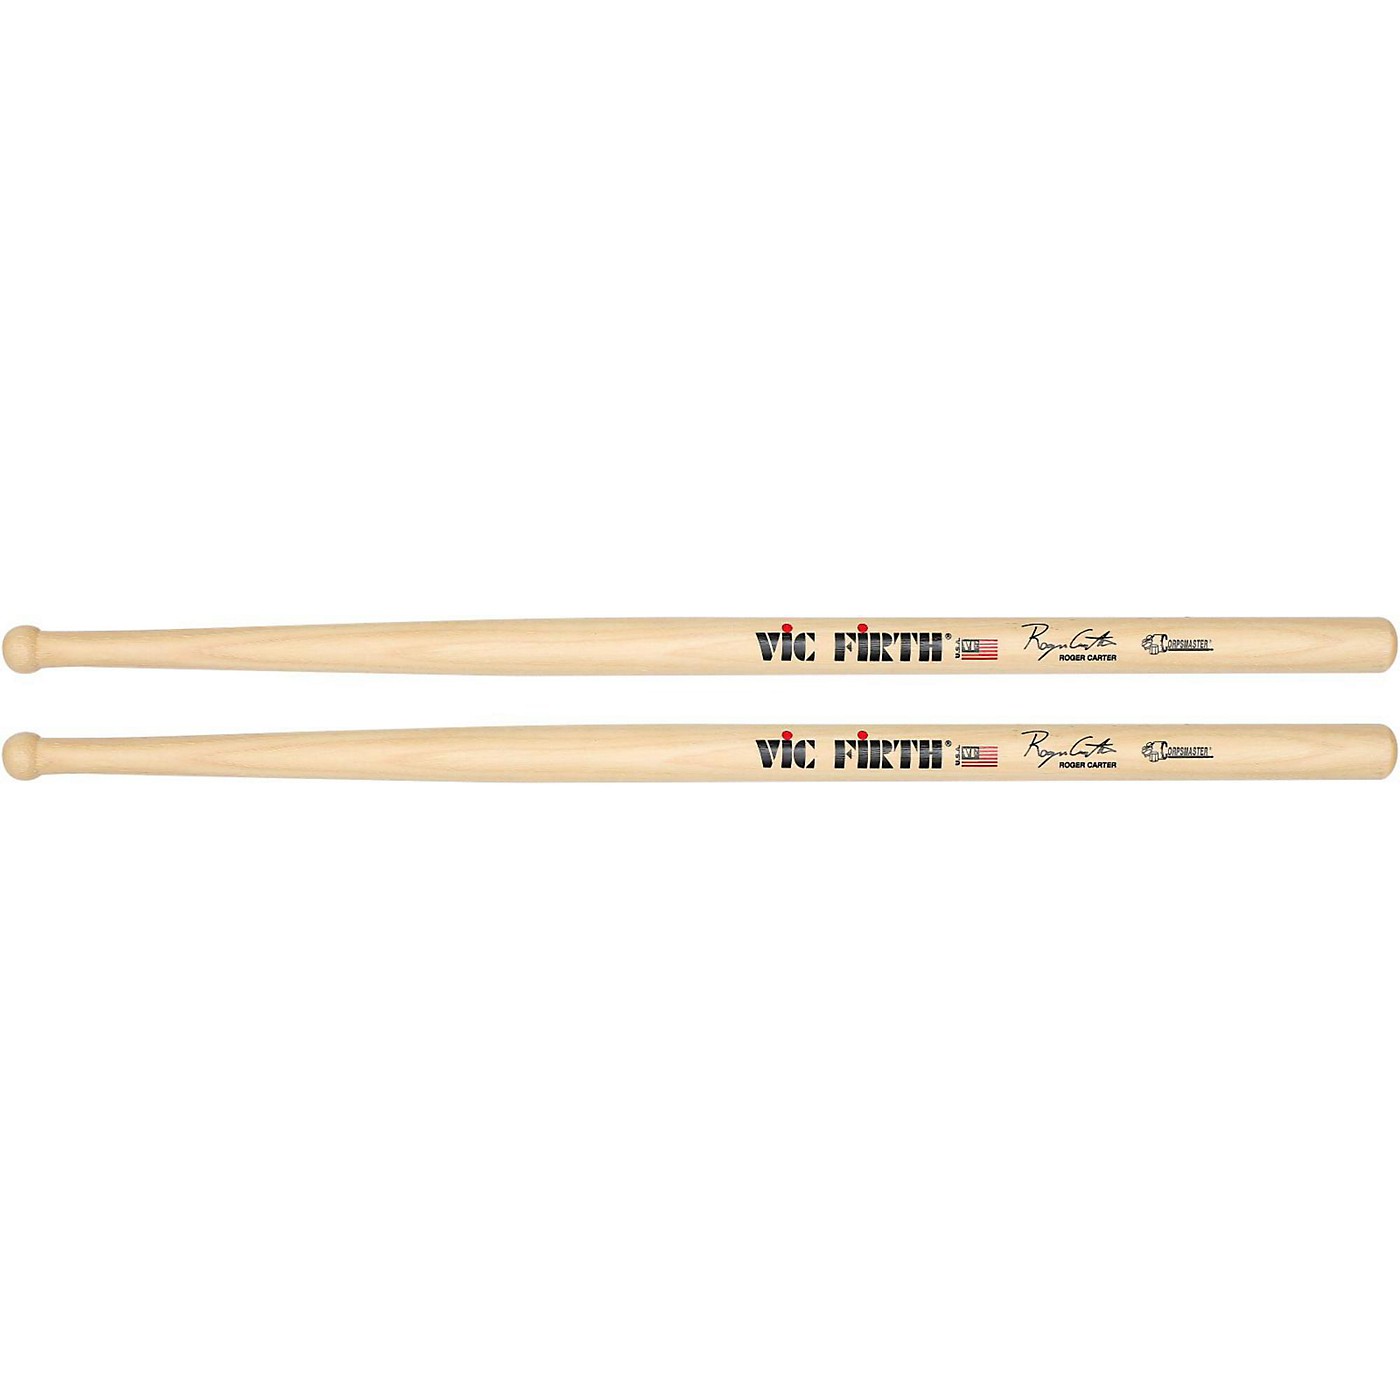 Vic Firth Corpsmaster Roger Carter Signature Marching Snare Drum Sticks thumbnail